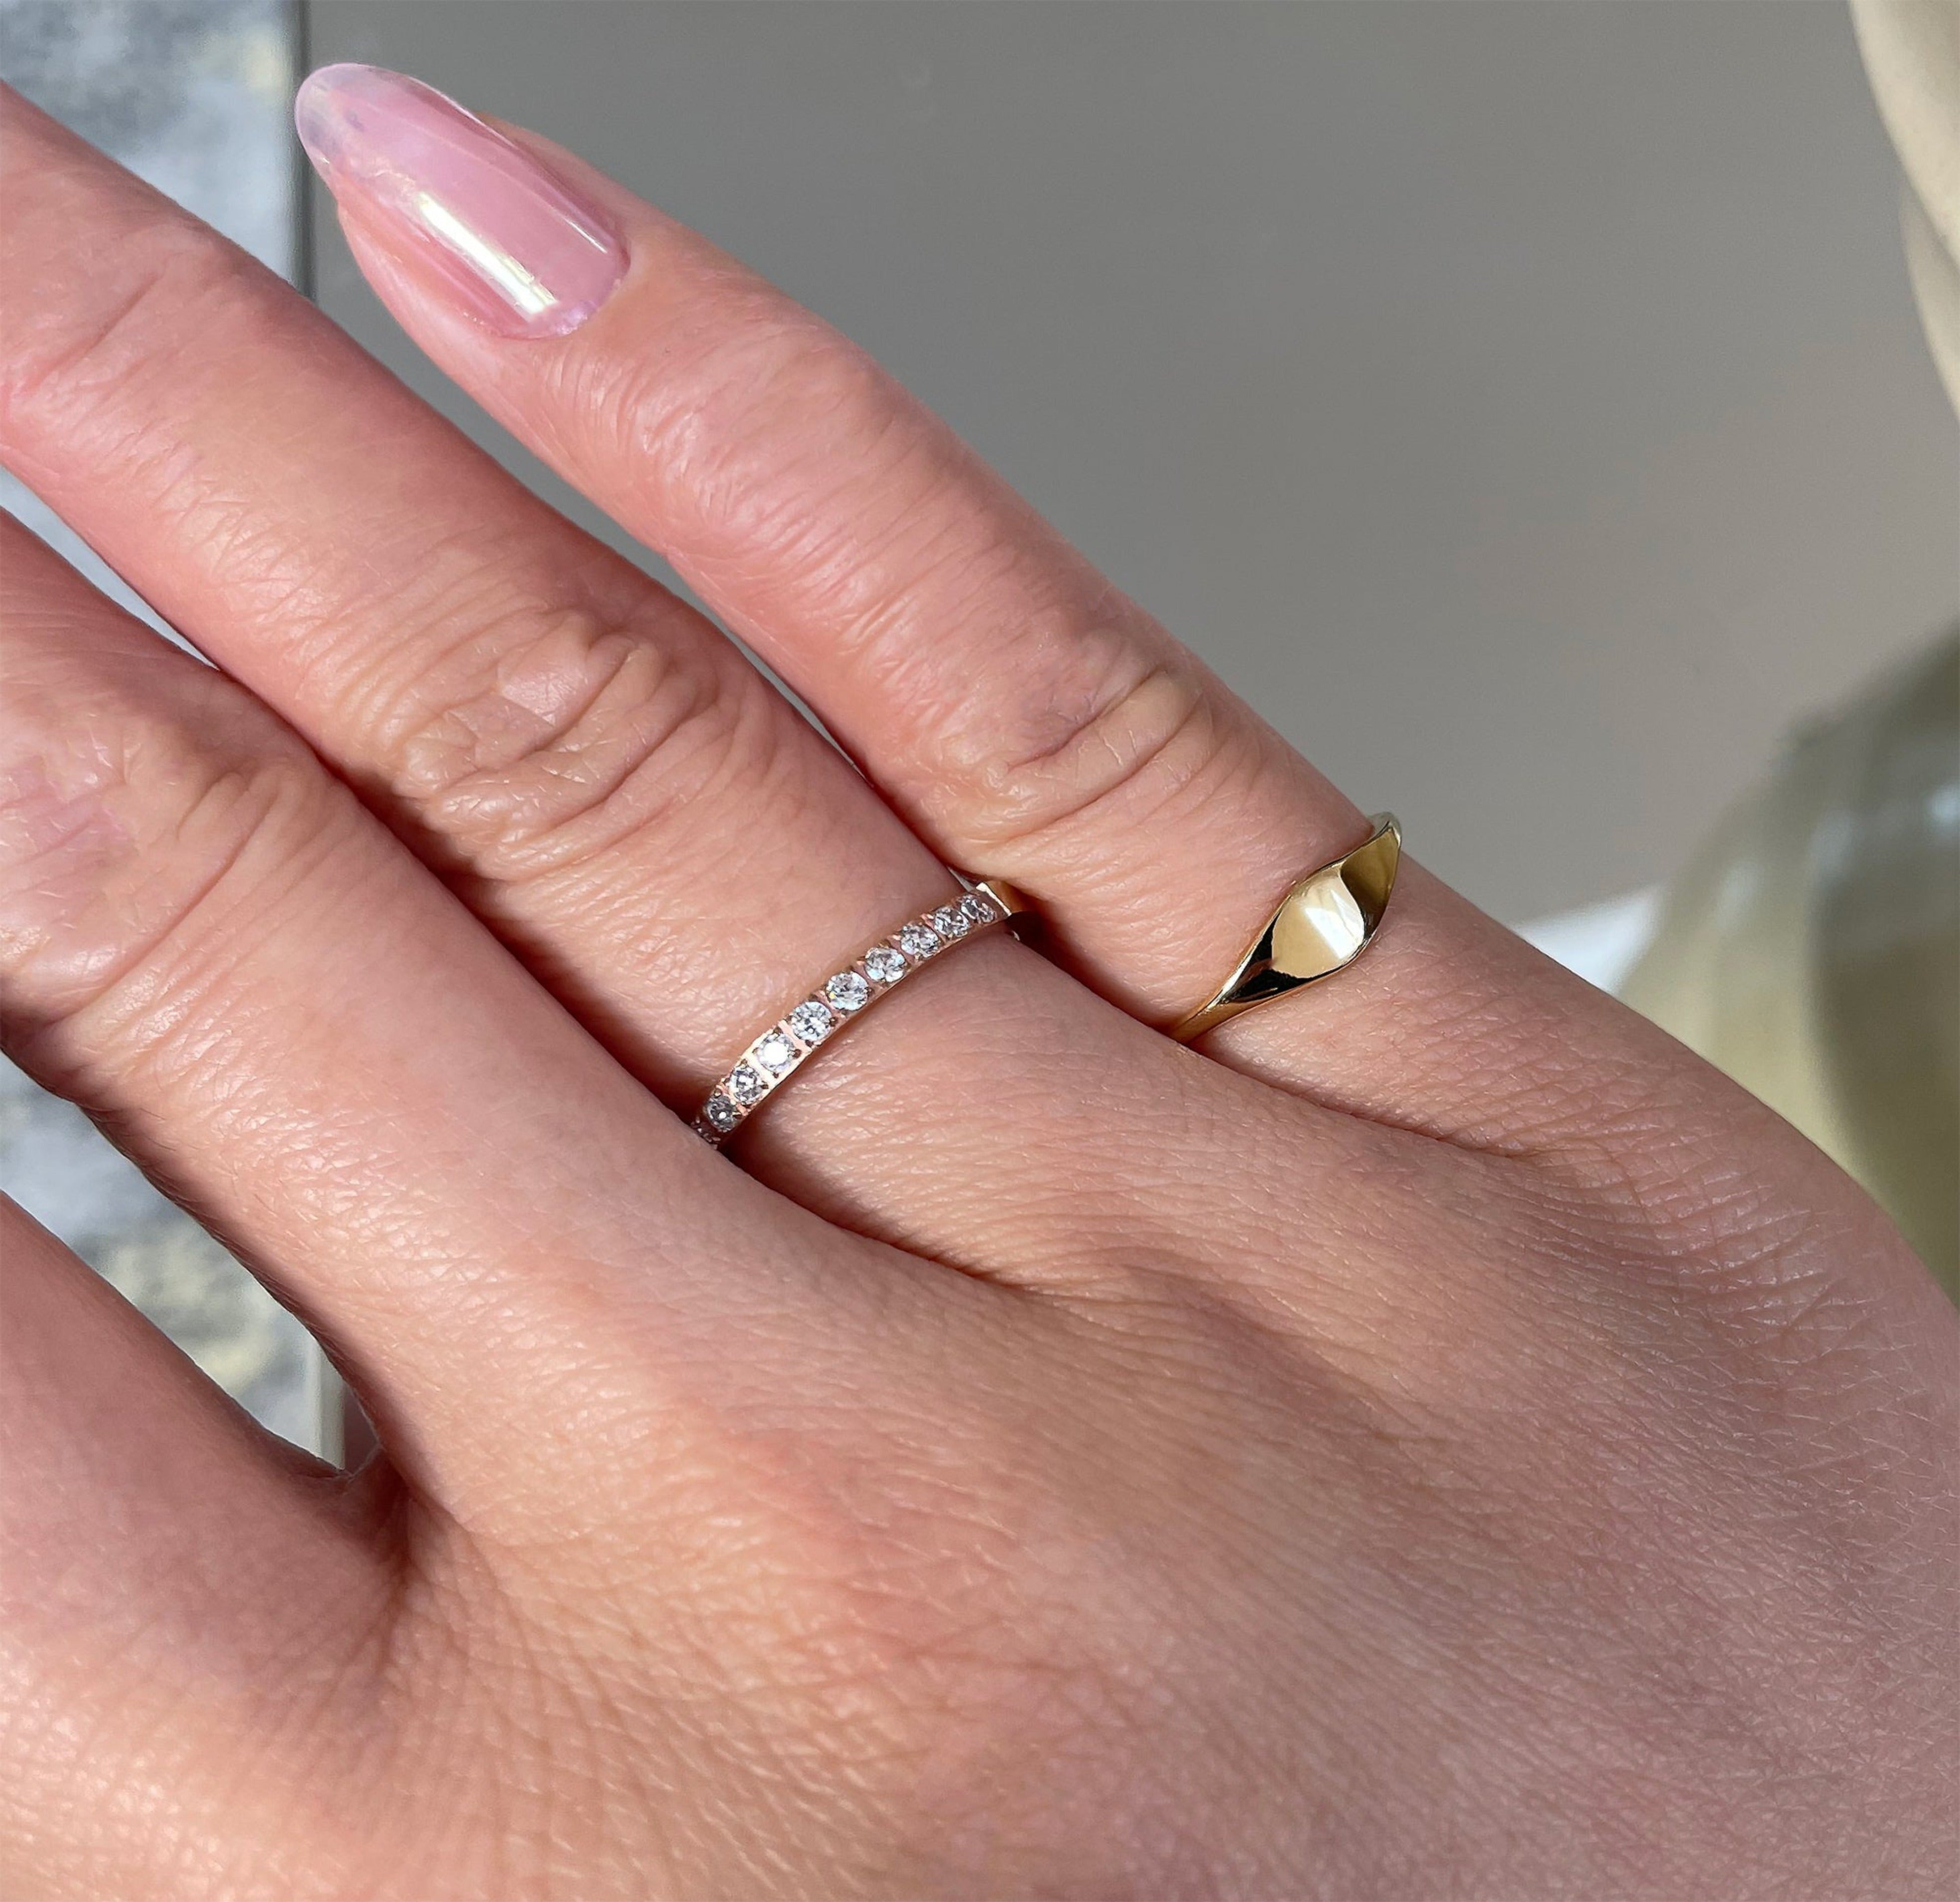 Stella rose gold half eternity ring band   paired with drew signet pinky ring waterproof jewelry